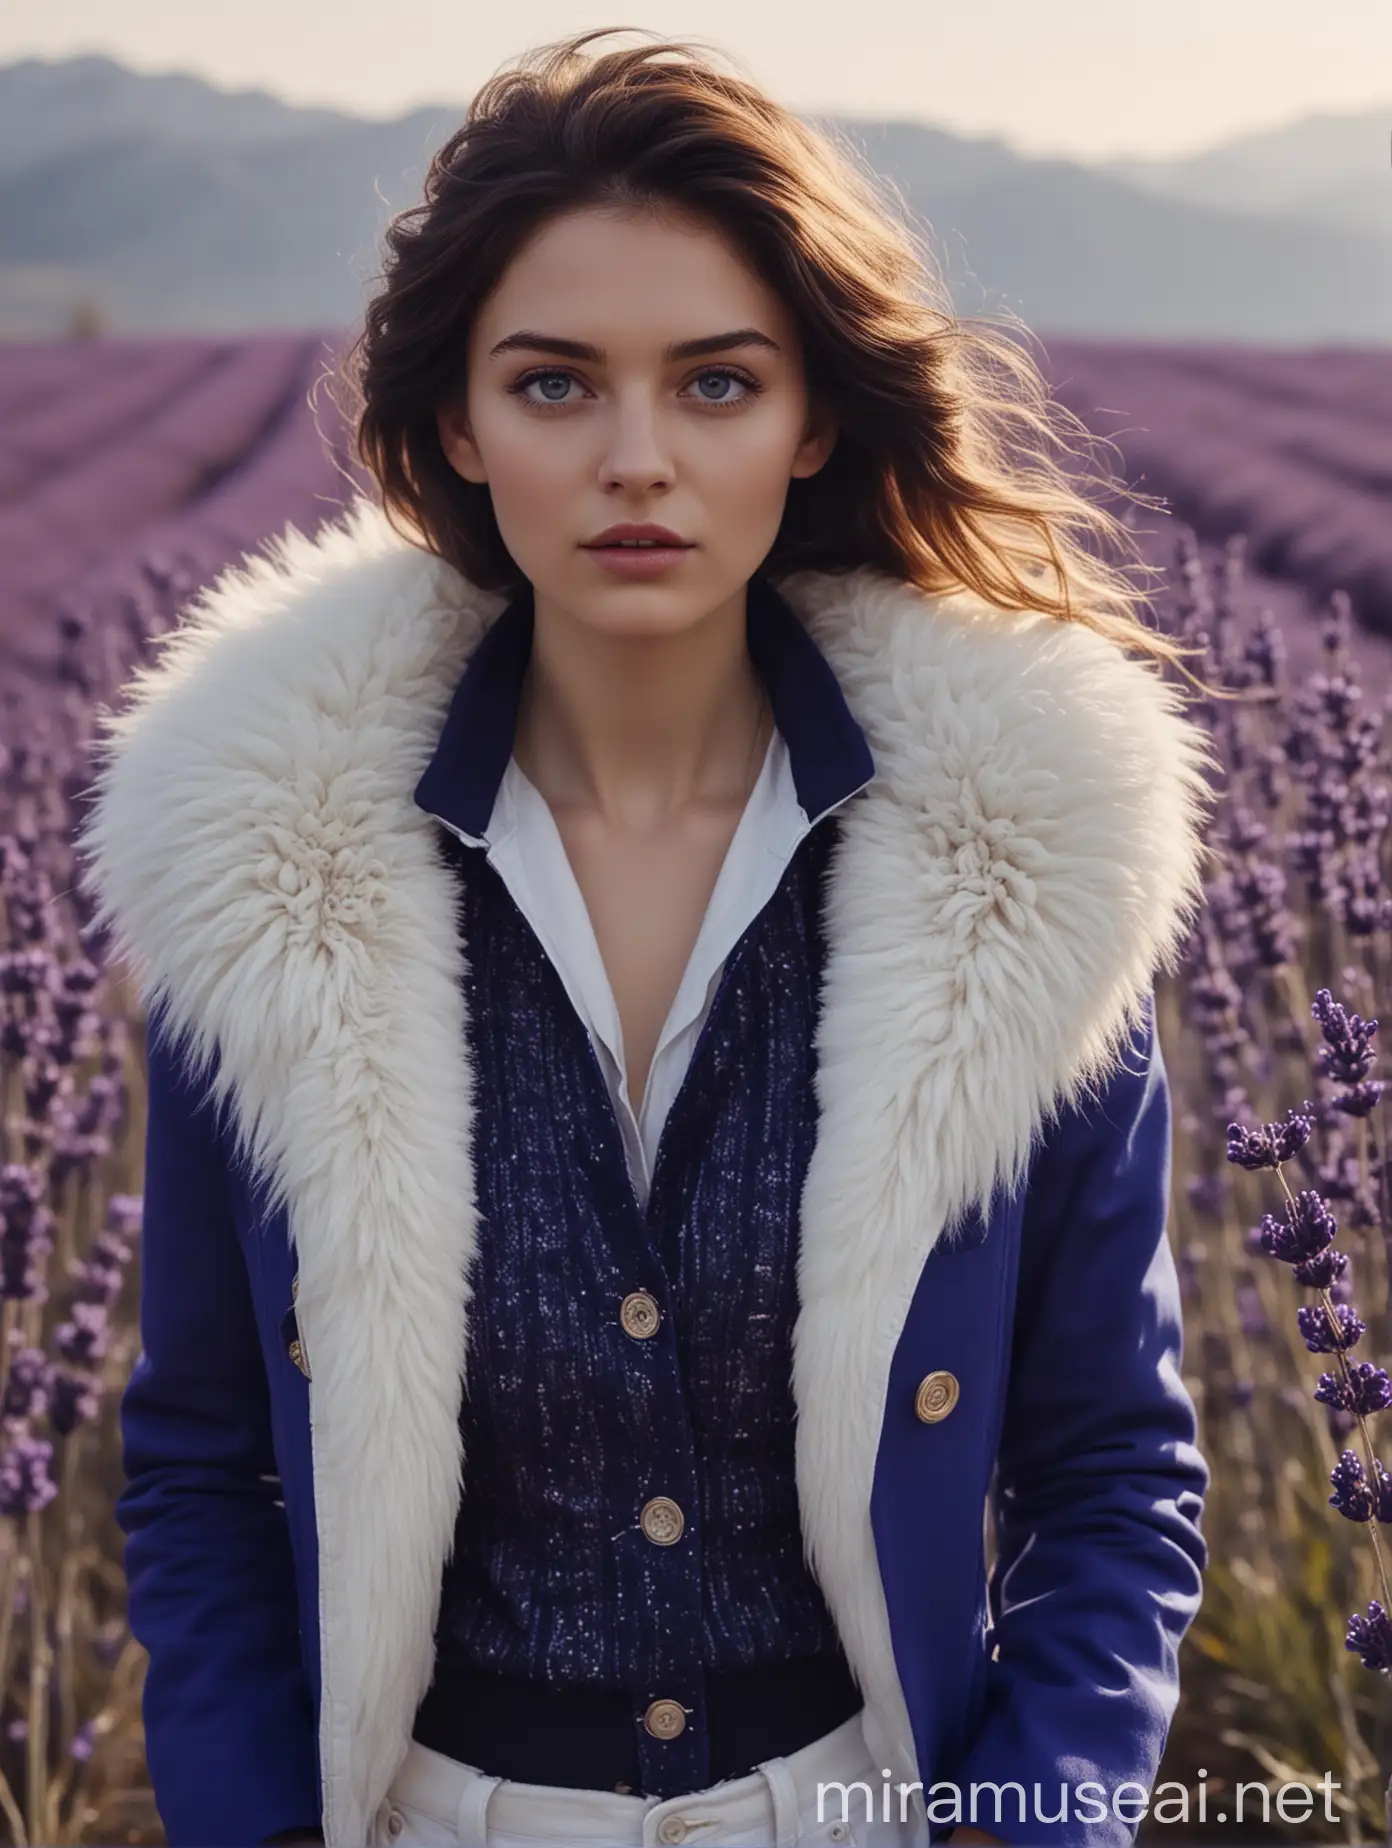 Athletic Woman in Royal Blue Jacket with Lavender Accents